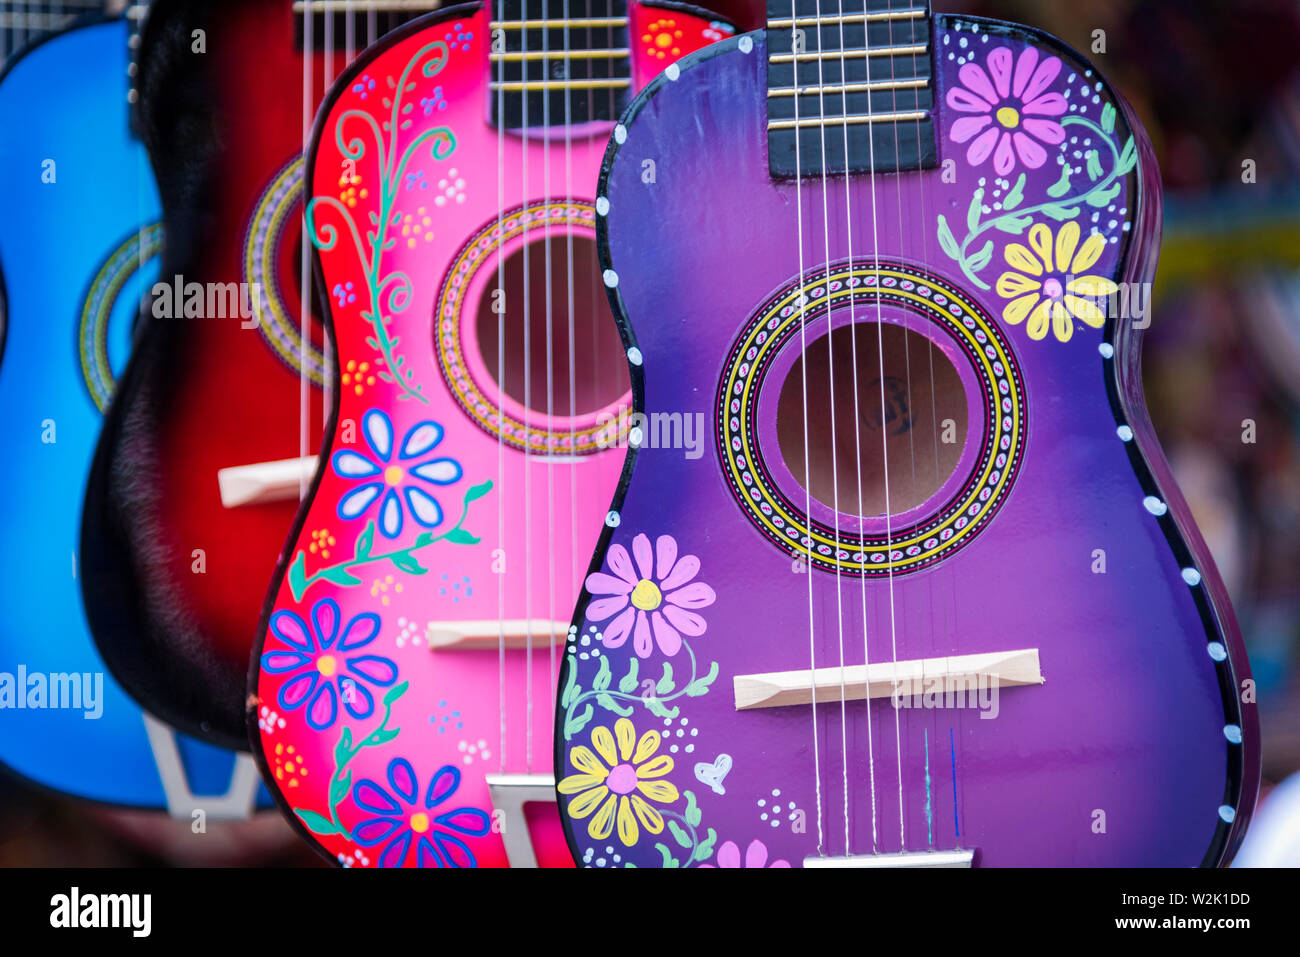 A group of colorful painted mexican made guitars Stock Photo